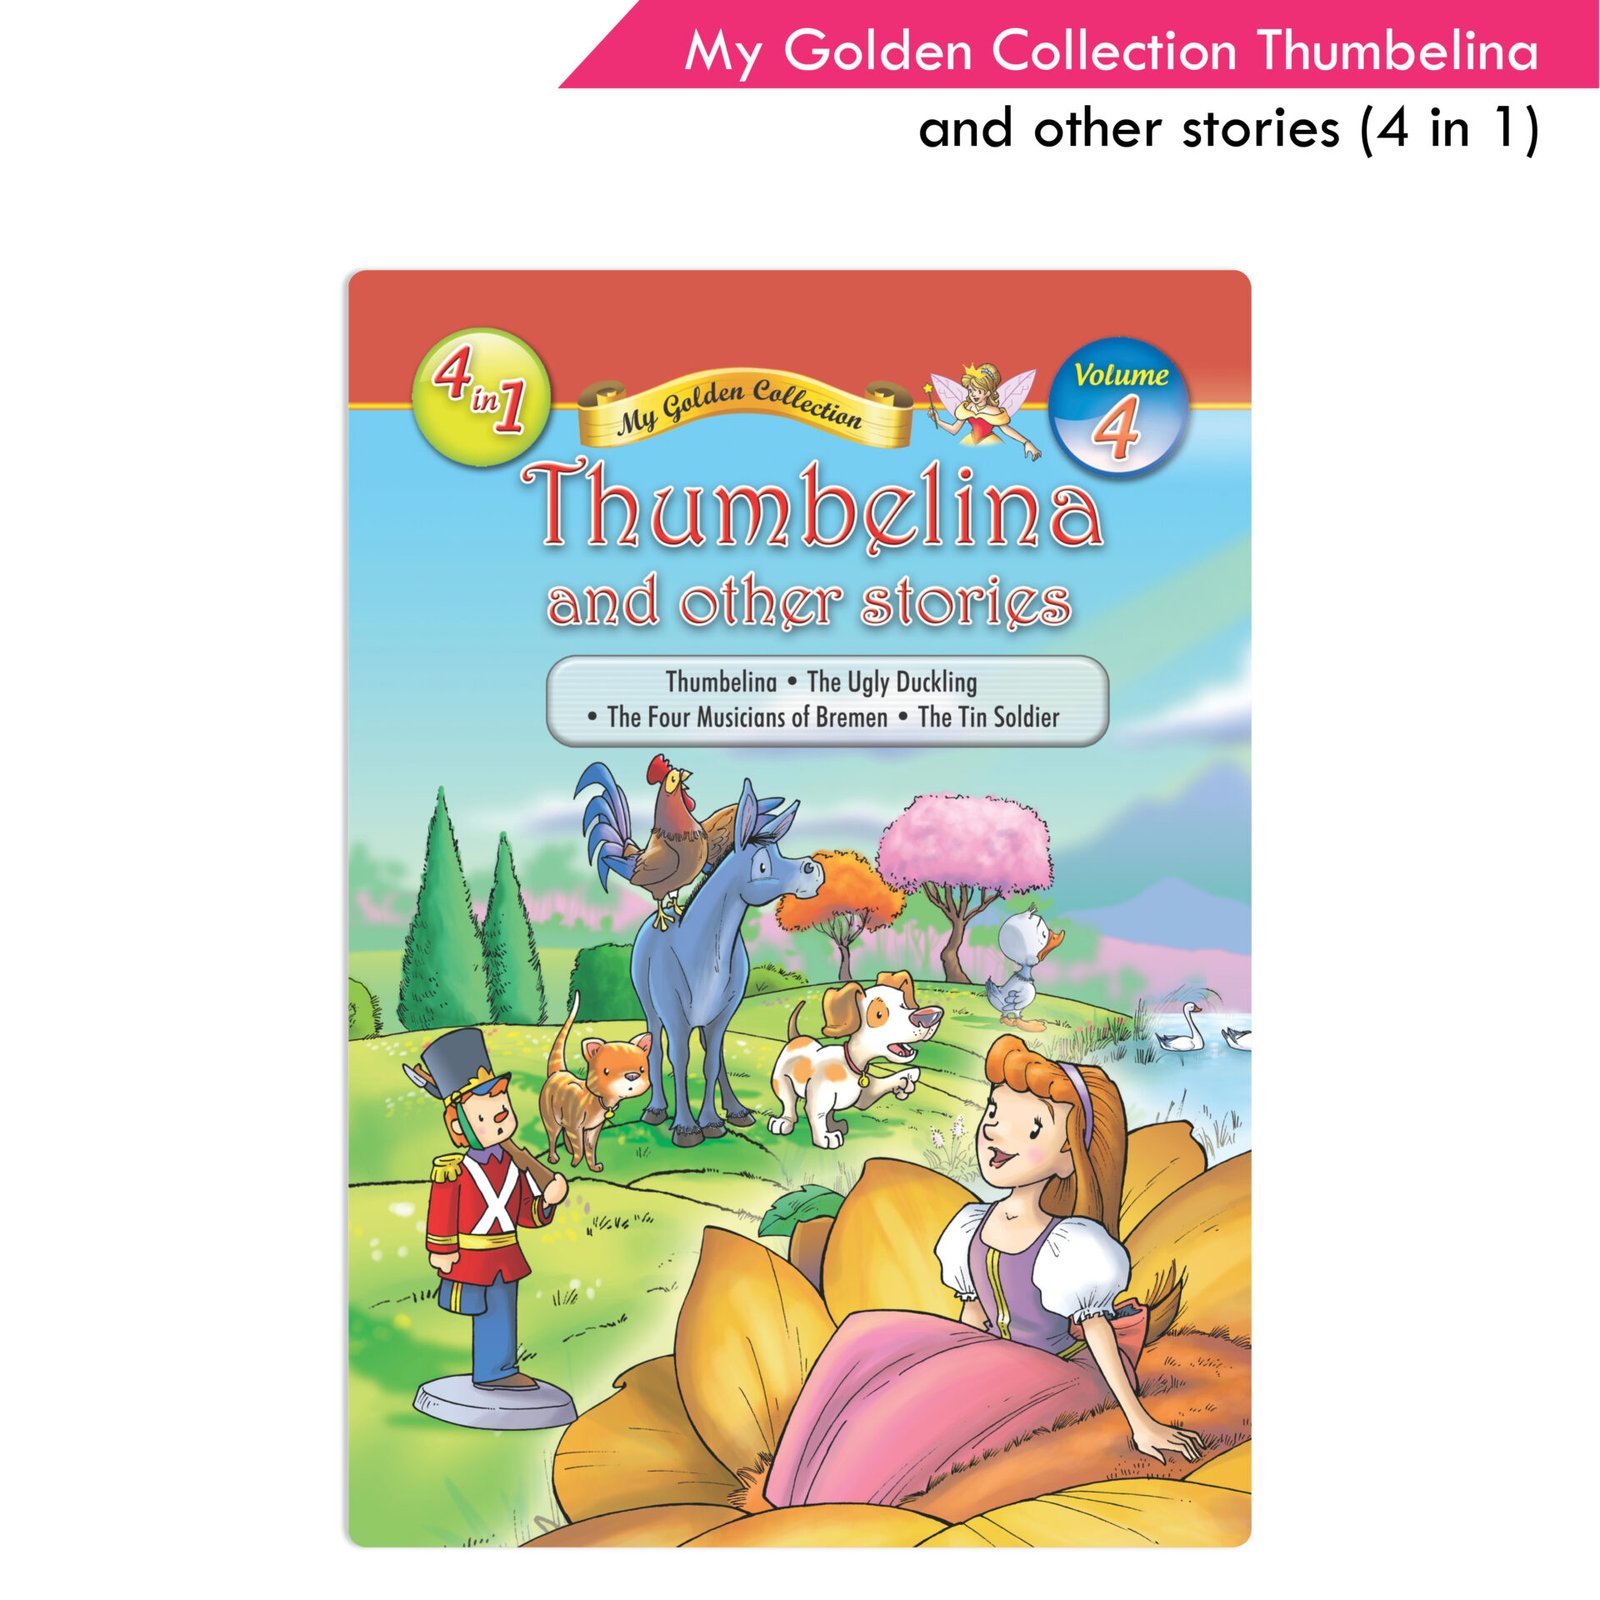 My Golden Collection Volume 4 Thumbelina and other Stories 1